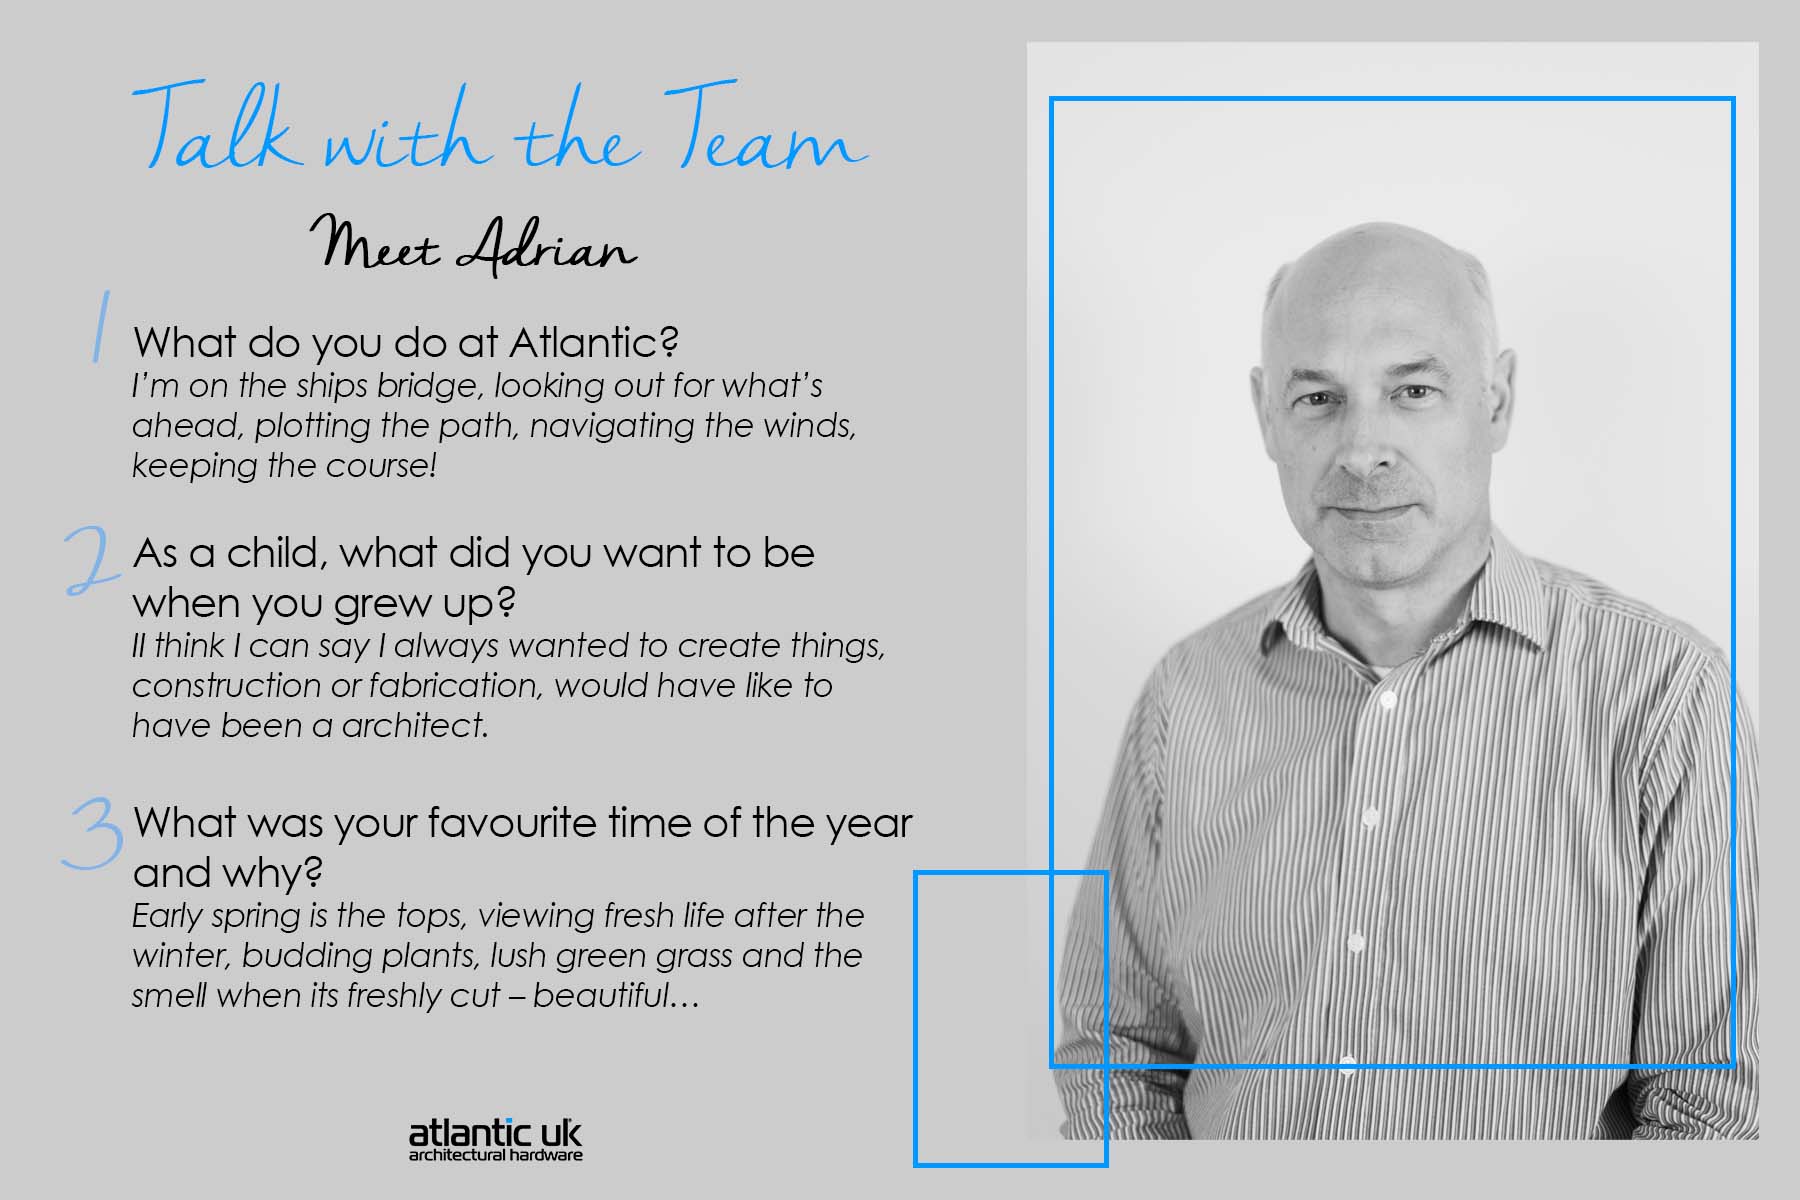 Meet Adrian & View our latest video